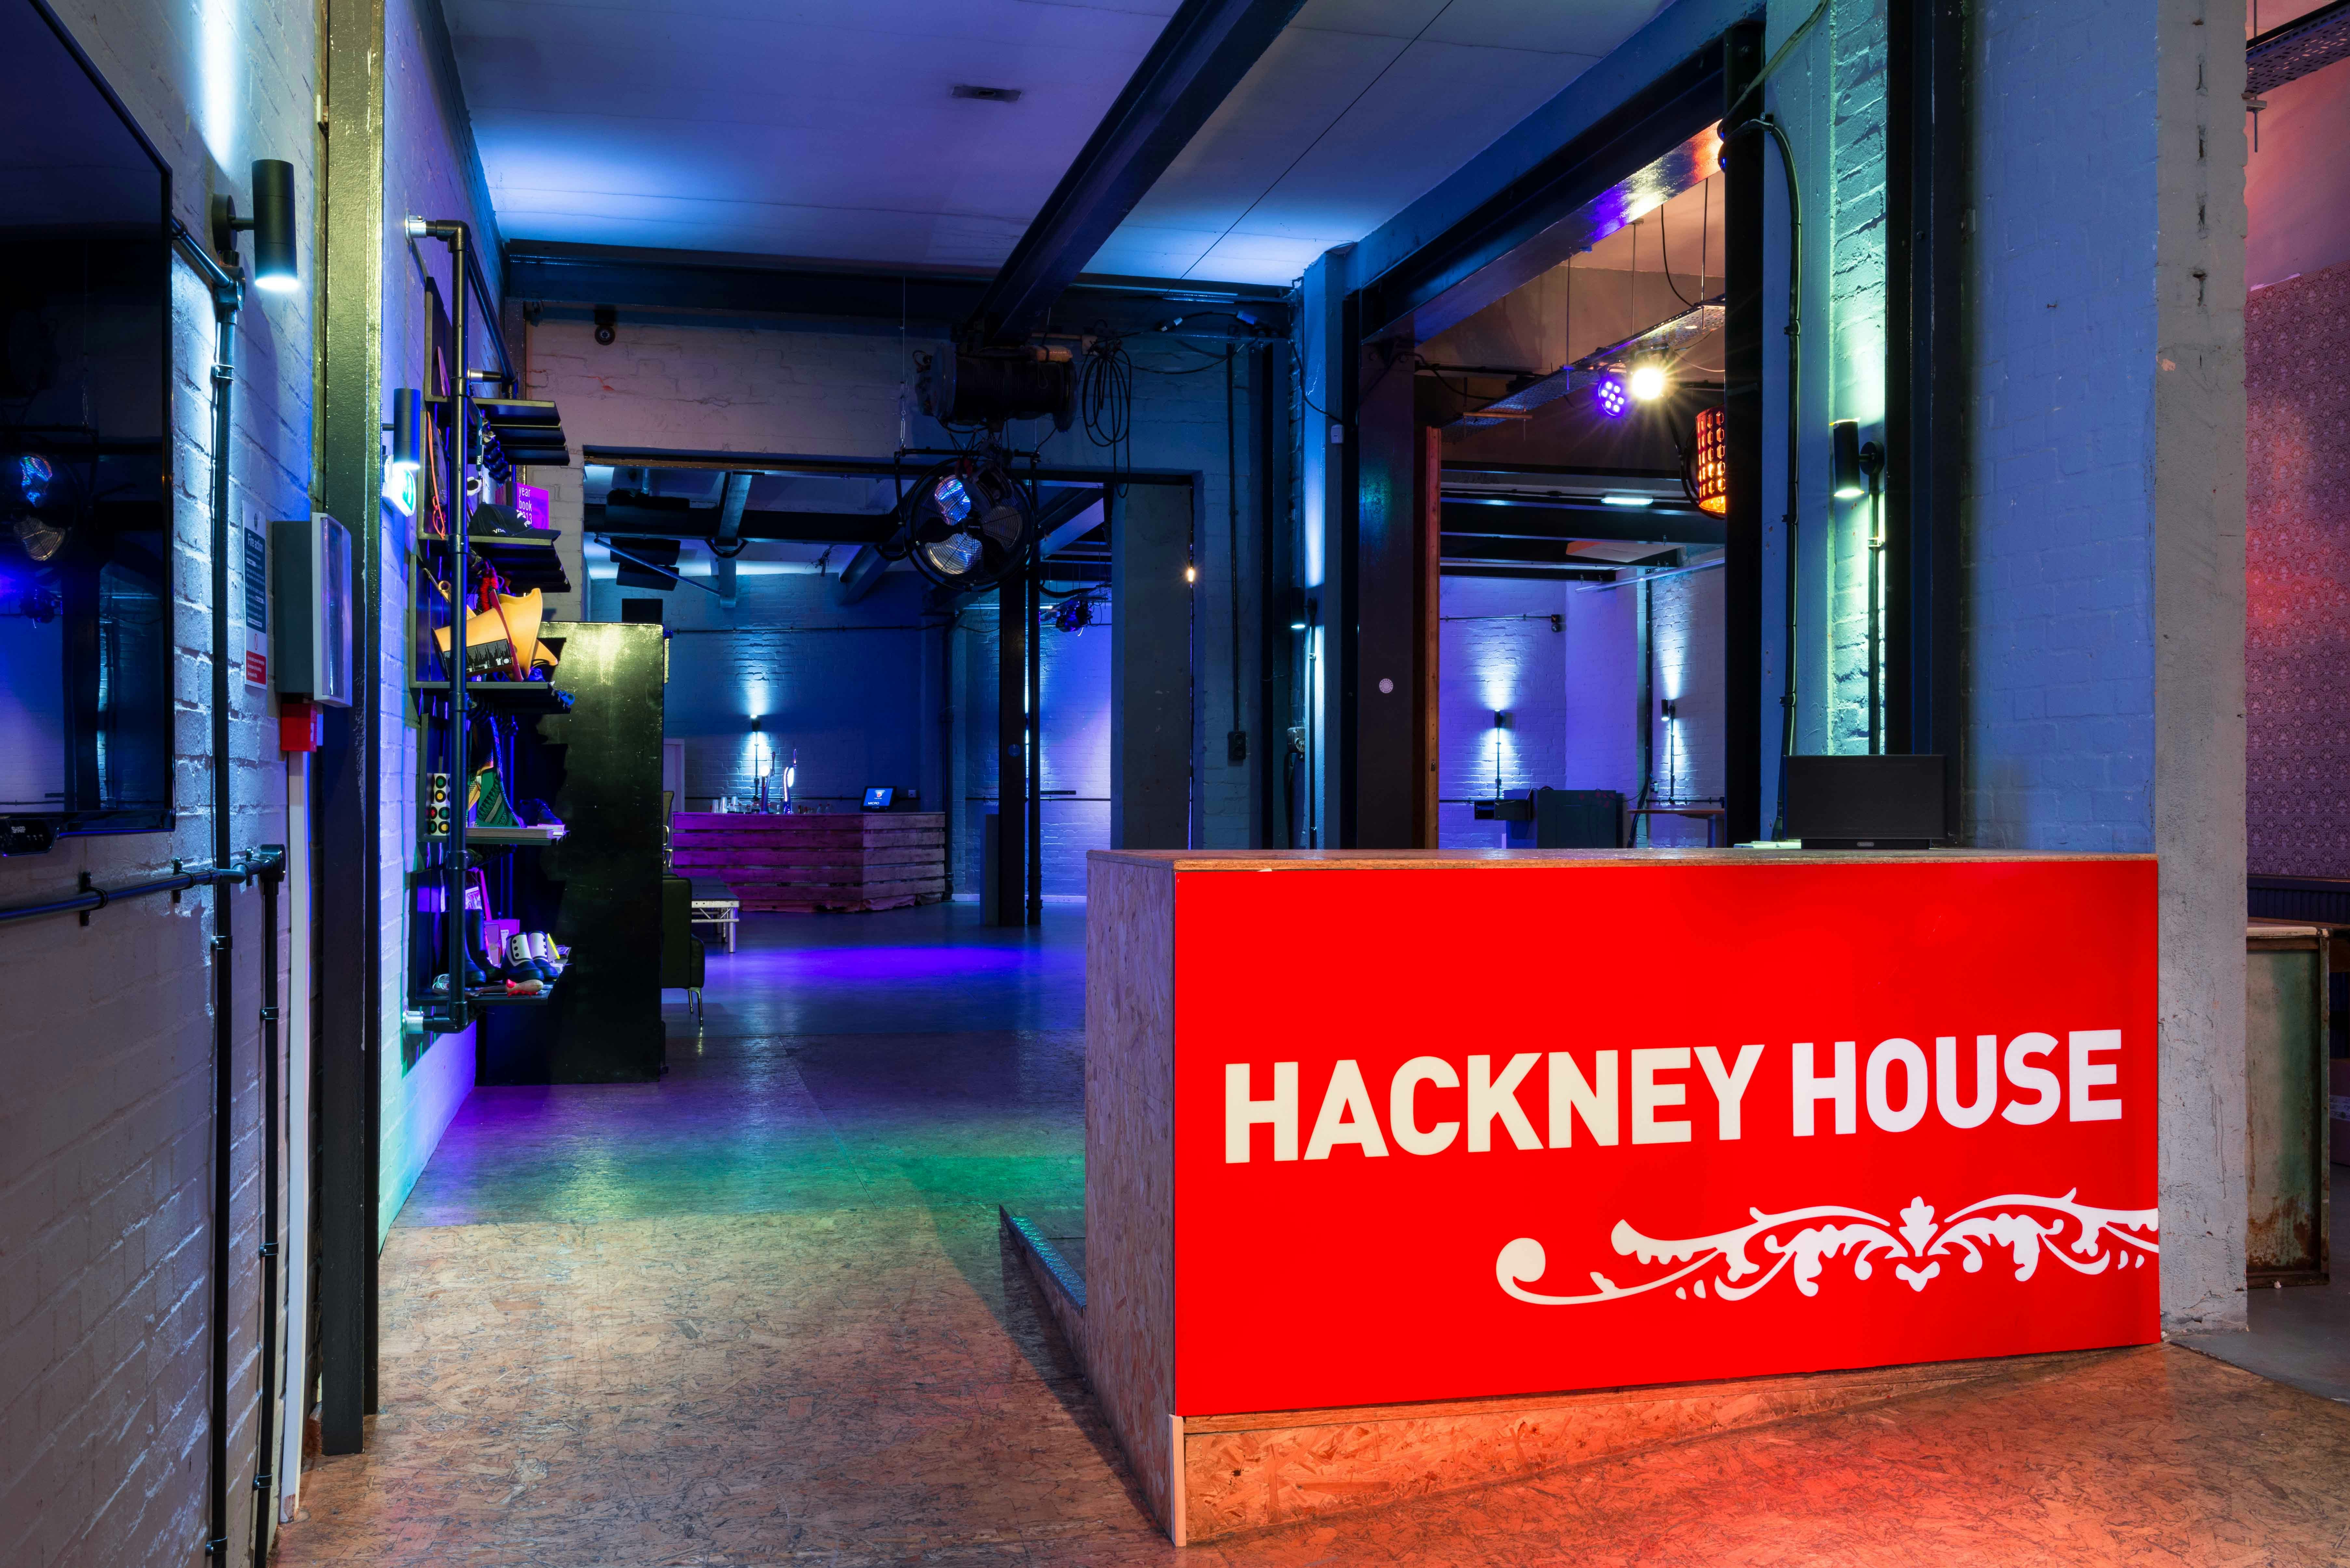 Pop Up Shops in London - Hackney House - Events in Whole Venue - Banner